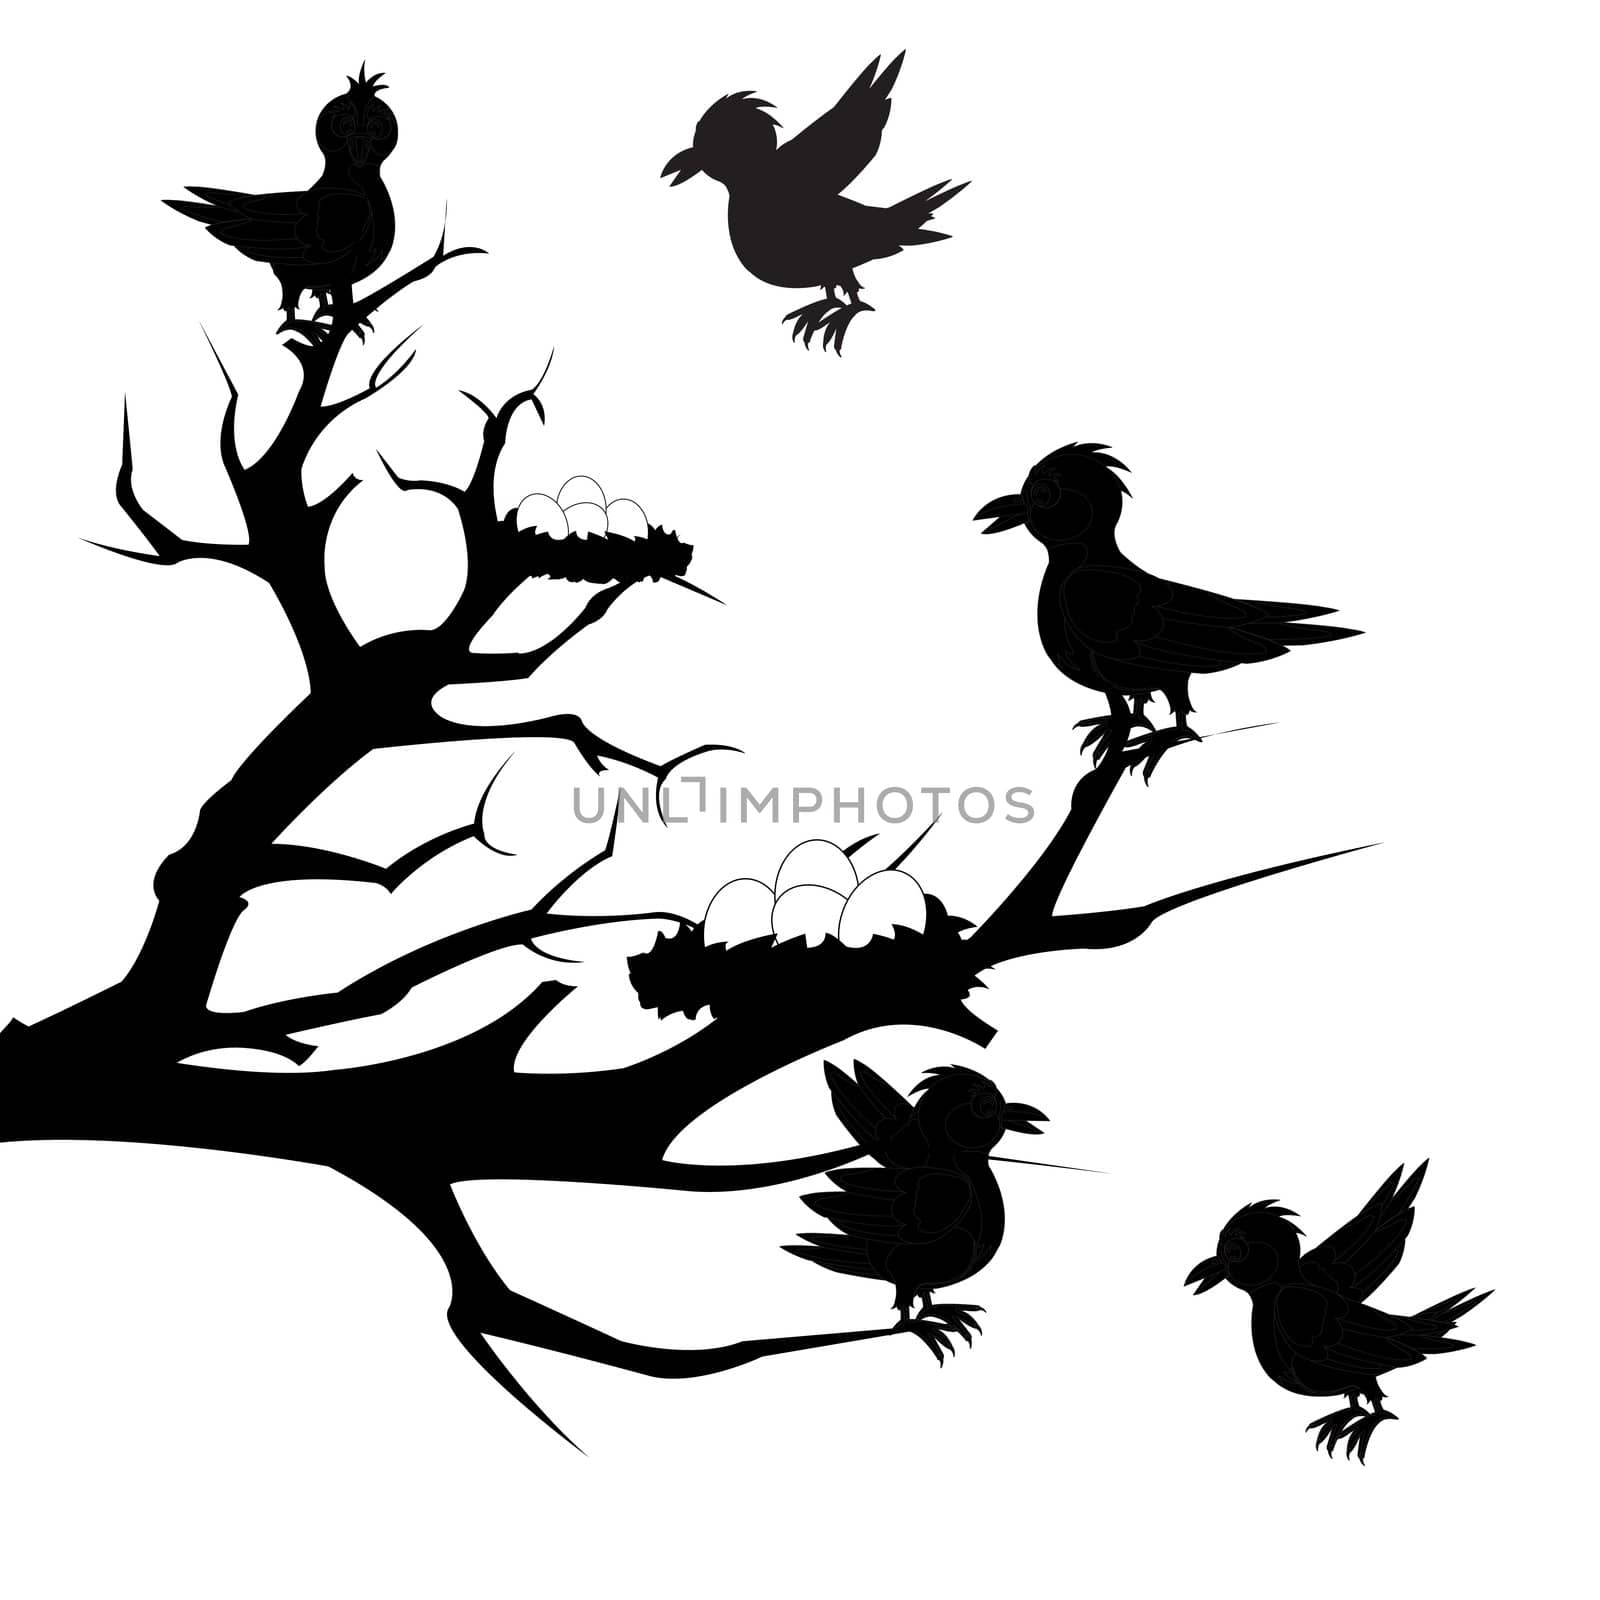 Black blanching illustration of the birds and jack with egg